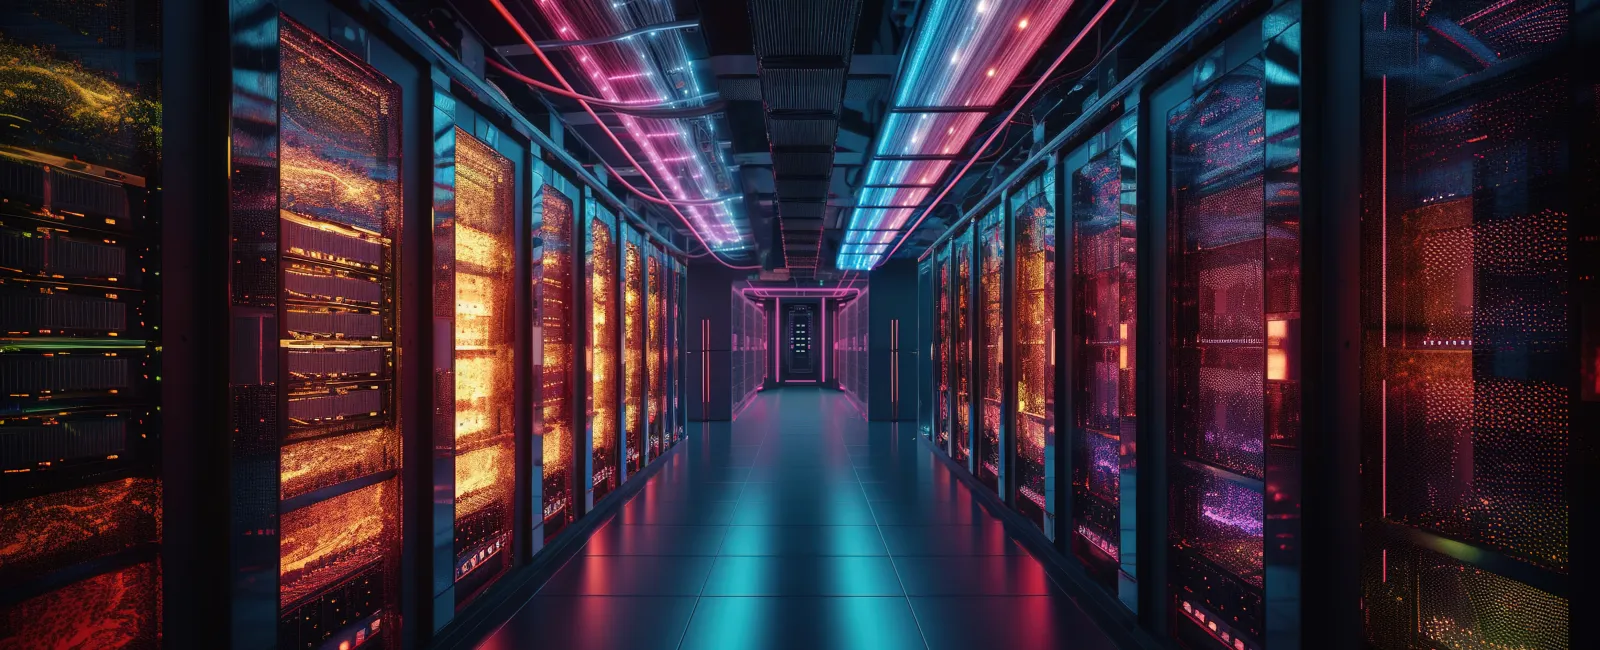 a long hallway with rows of computer servers